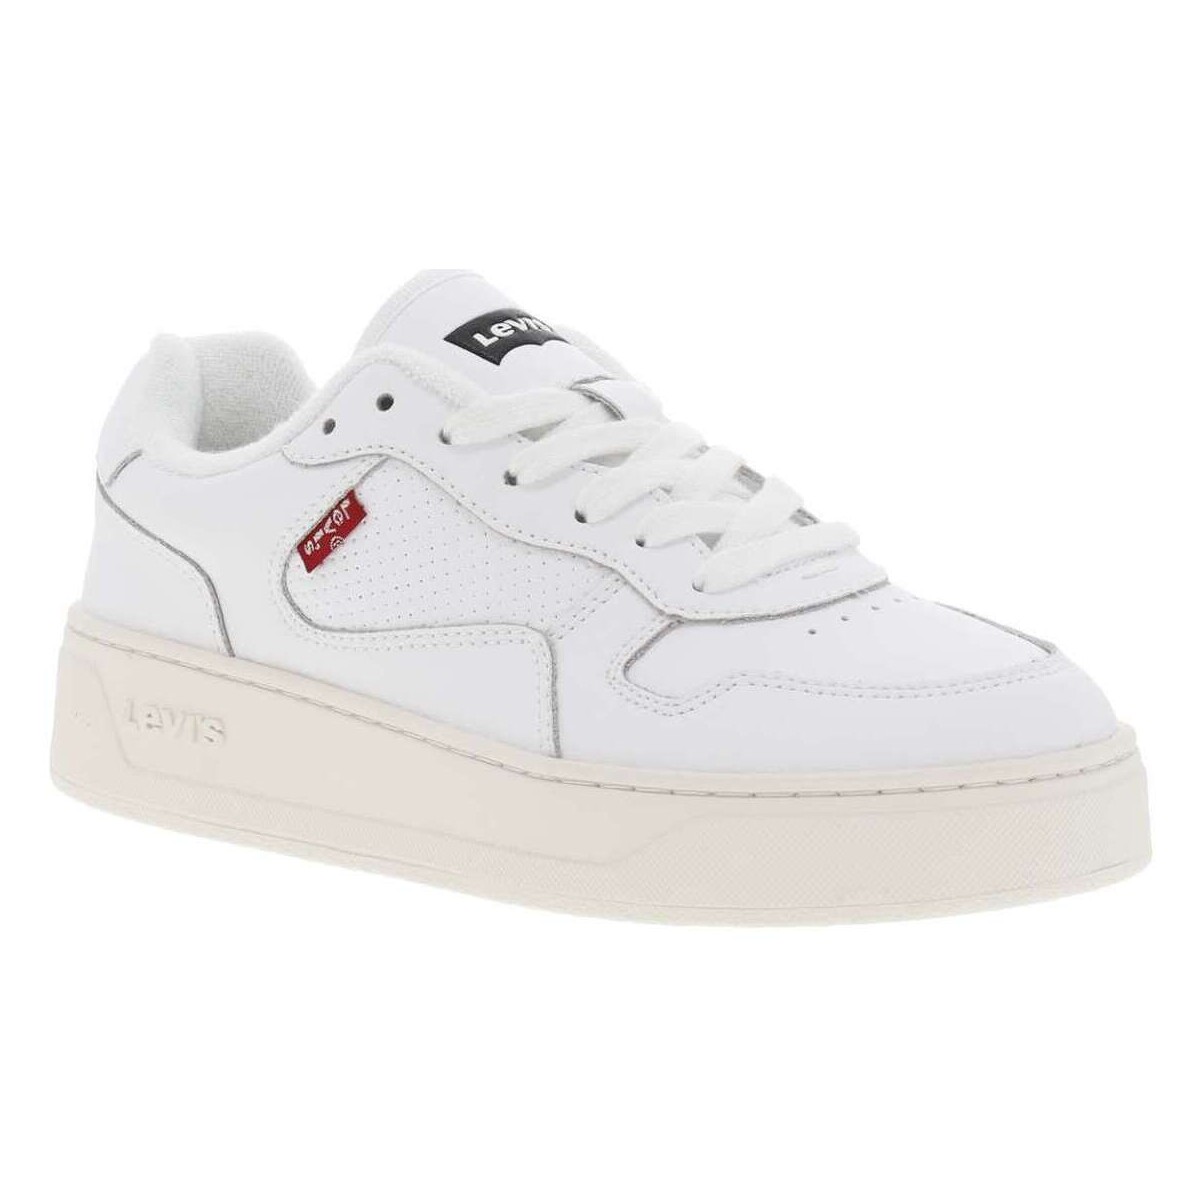 Chaussures Femme Baskets mode Levi's 19133CHPE23 Blanc